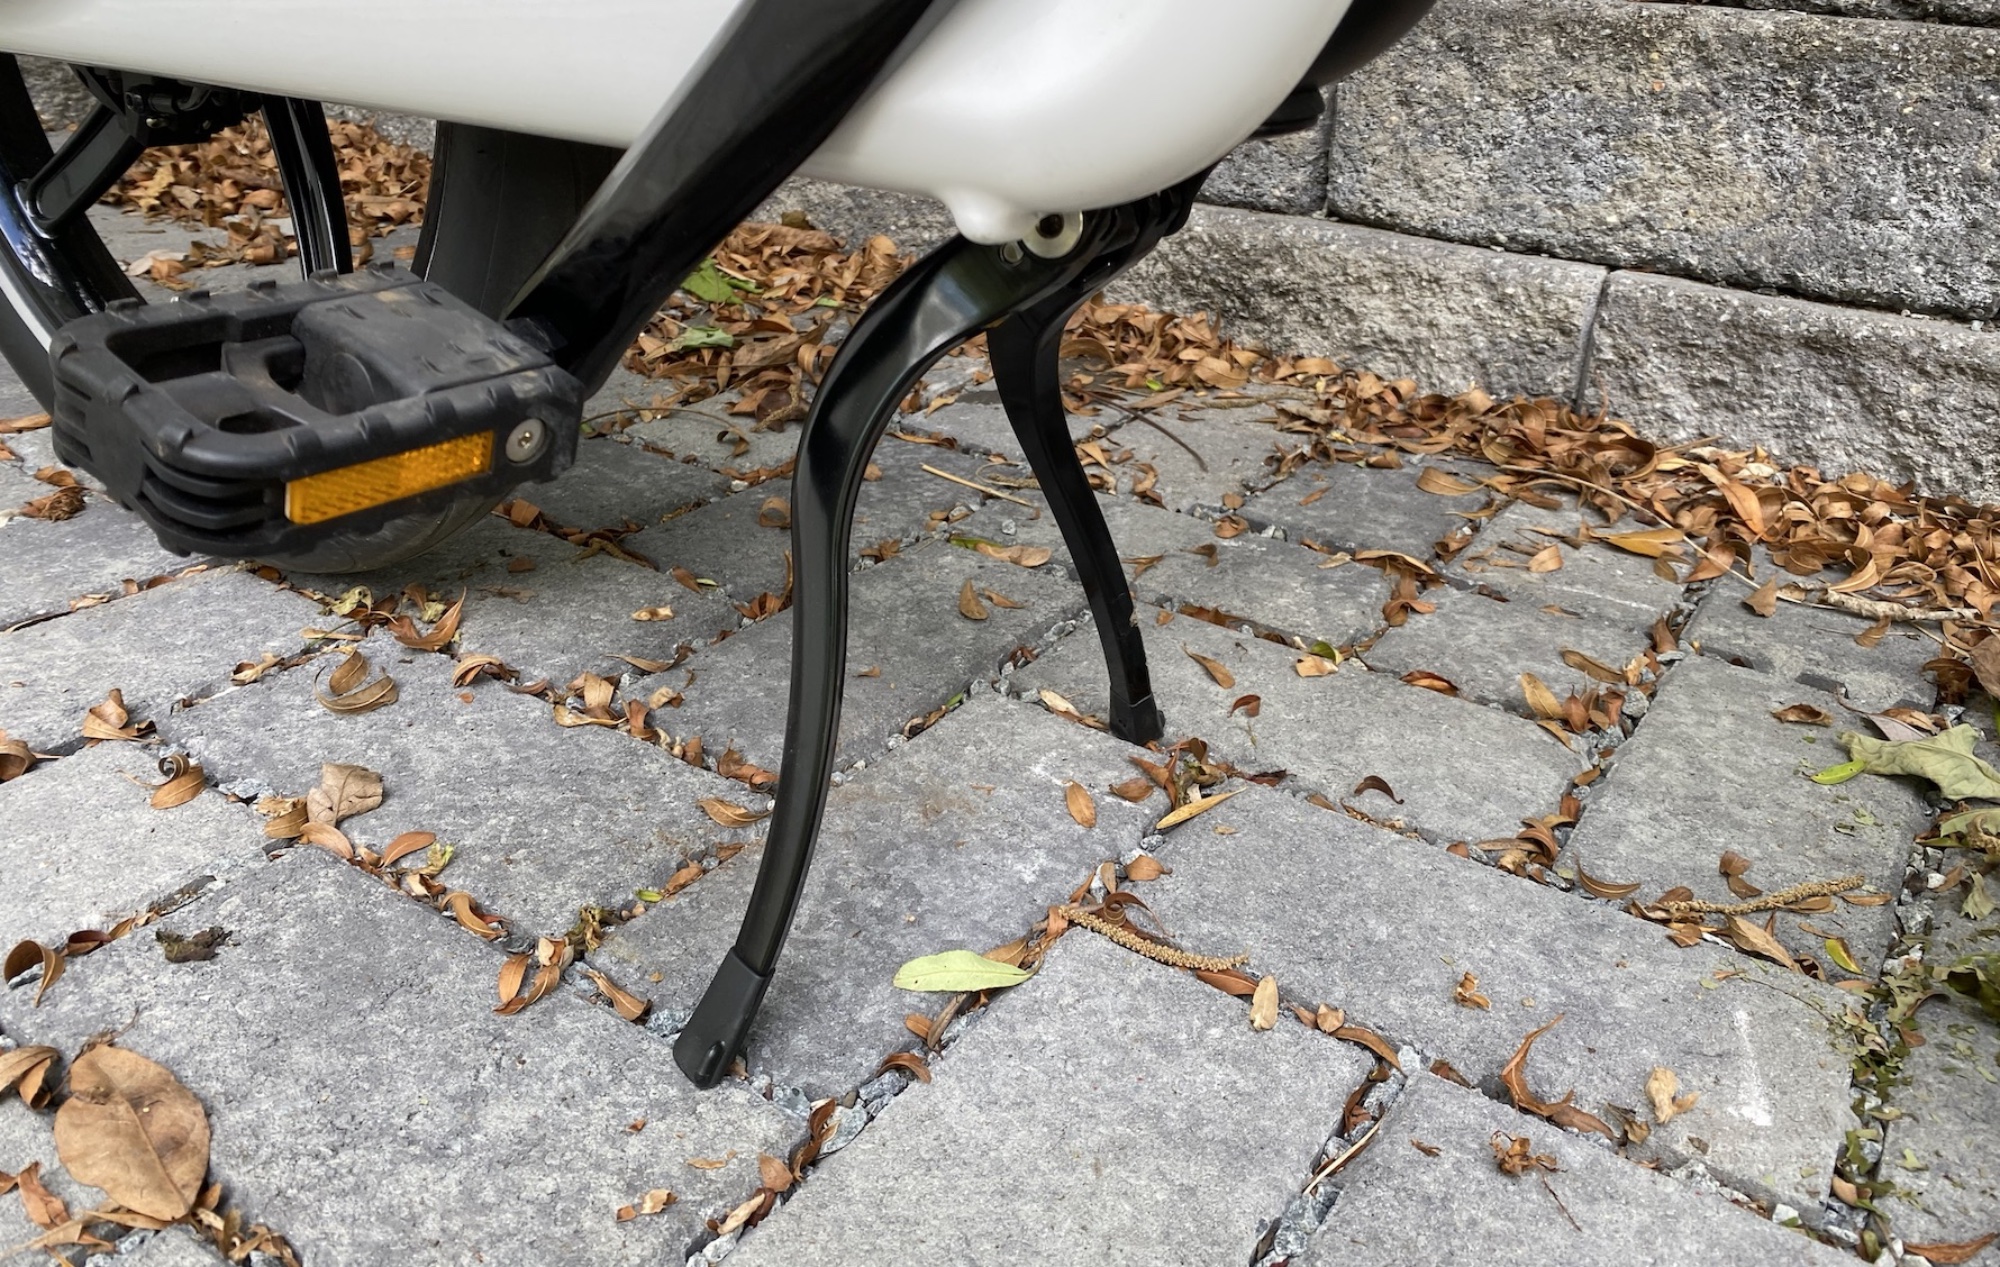 The kickstand spreads out when extended, keeping the bike upright even when the front wheel is folded next to the rear wheel.